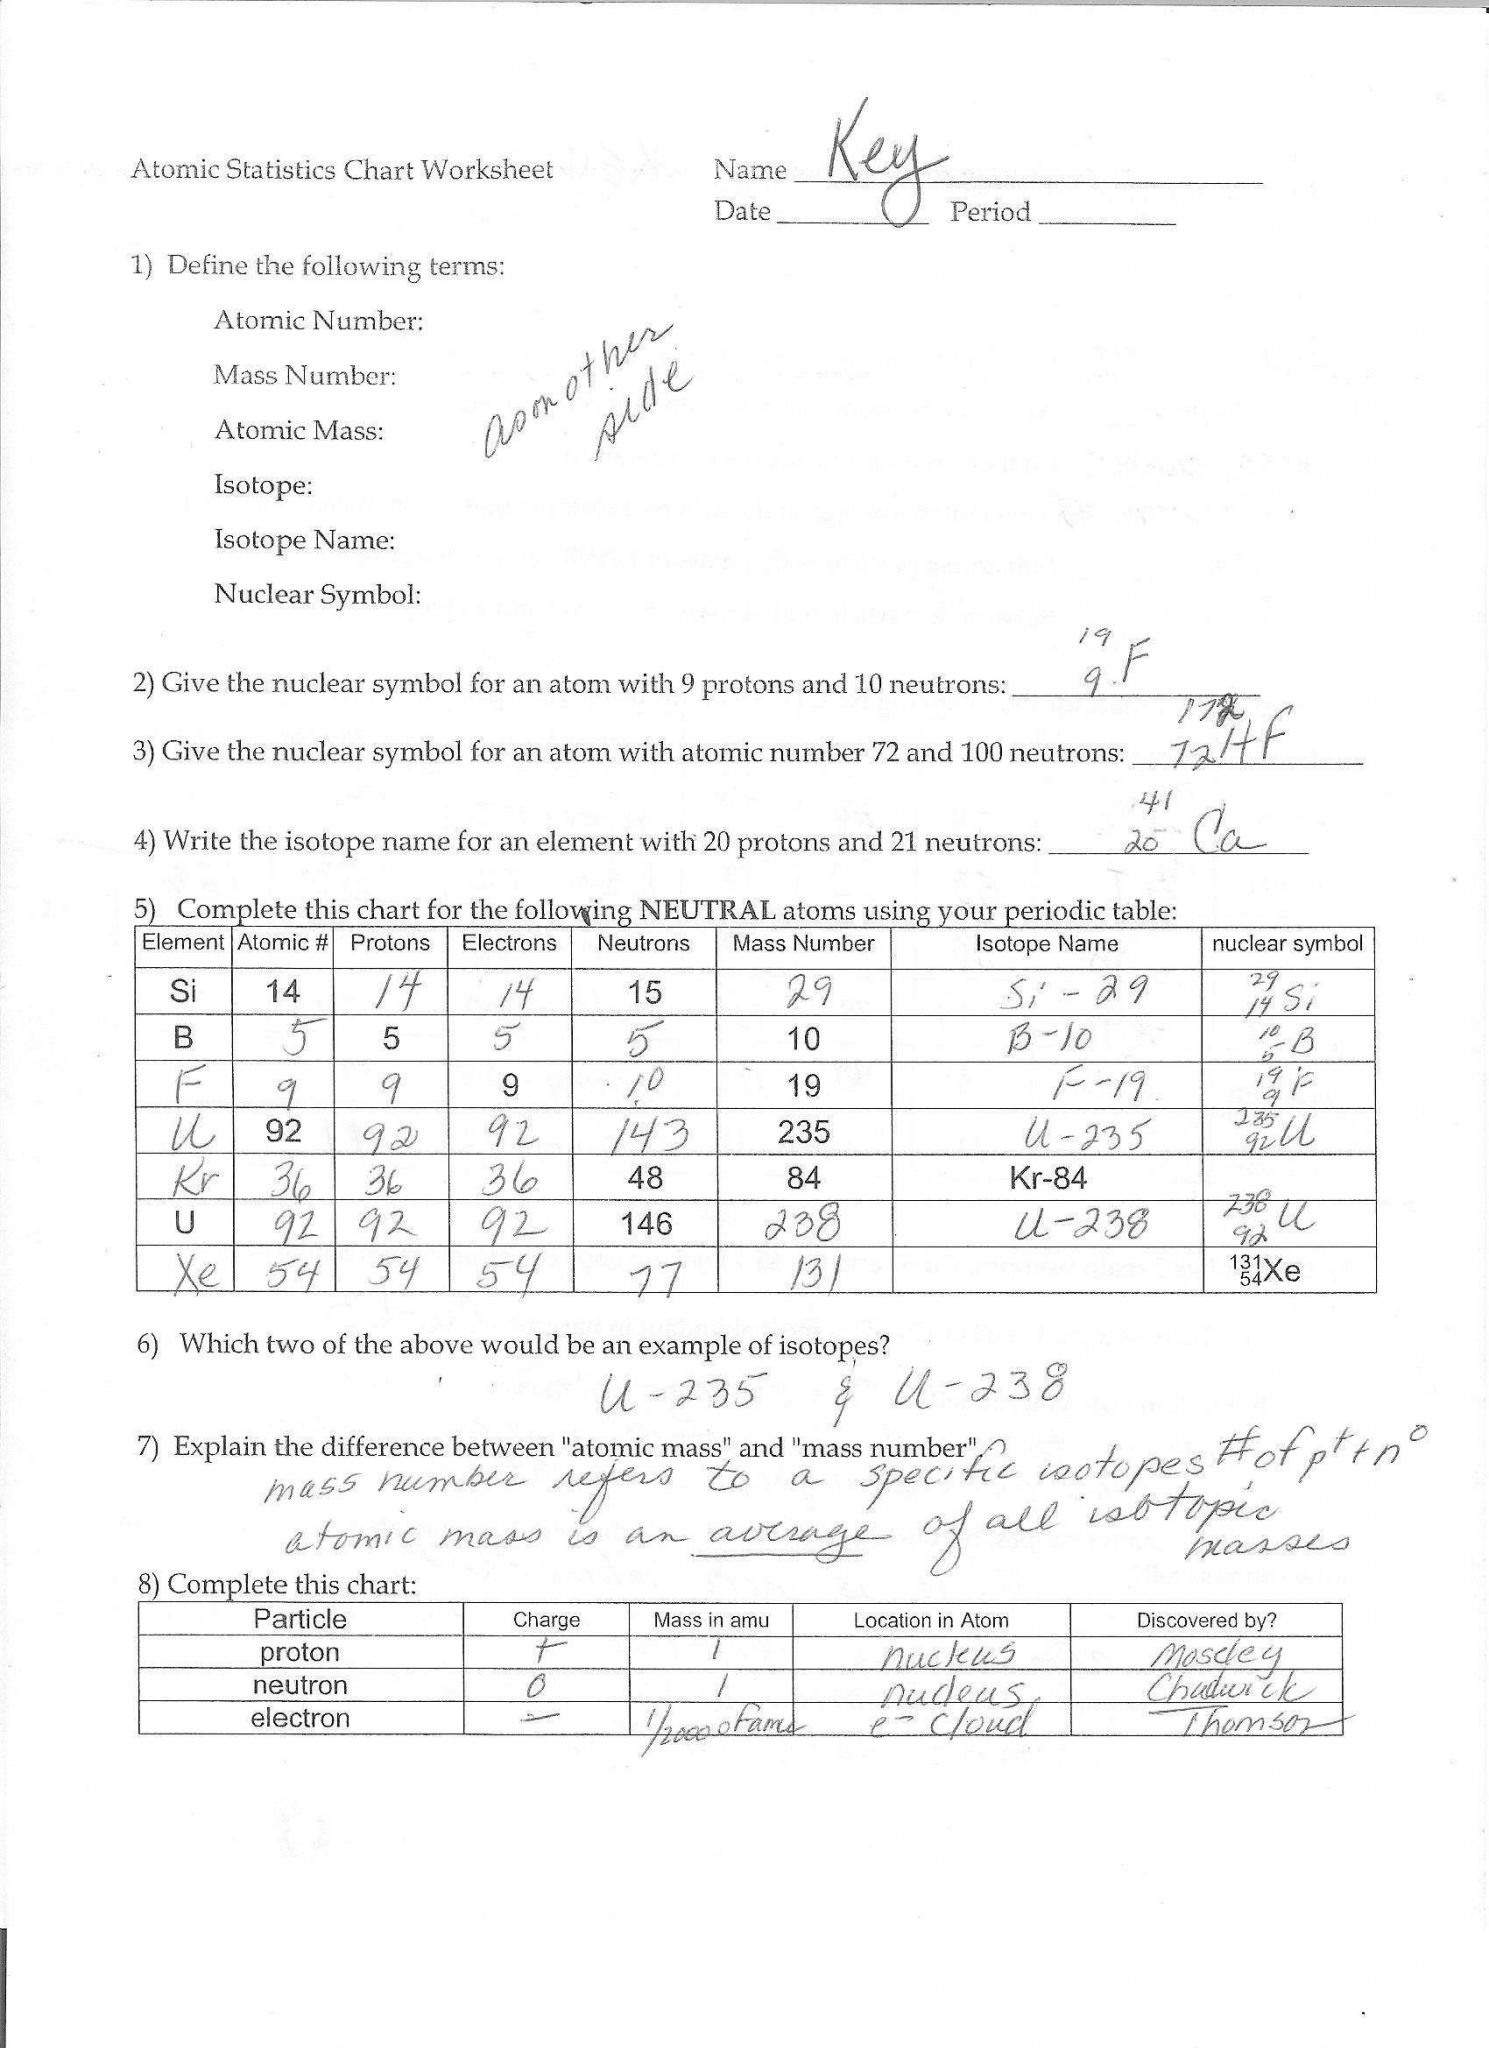 isotopes-and-atomic-mass-worksheet-answer-key-db-excel